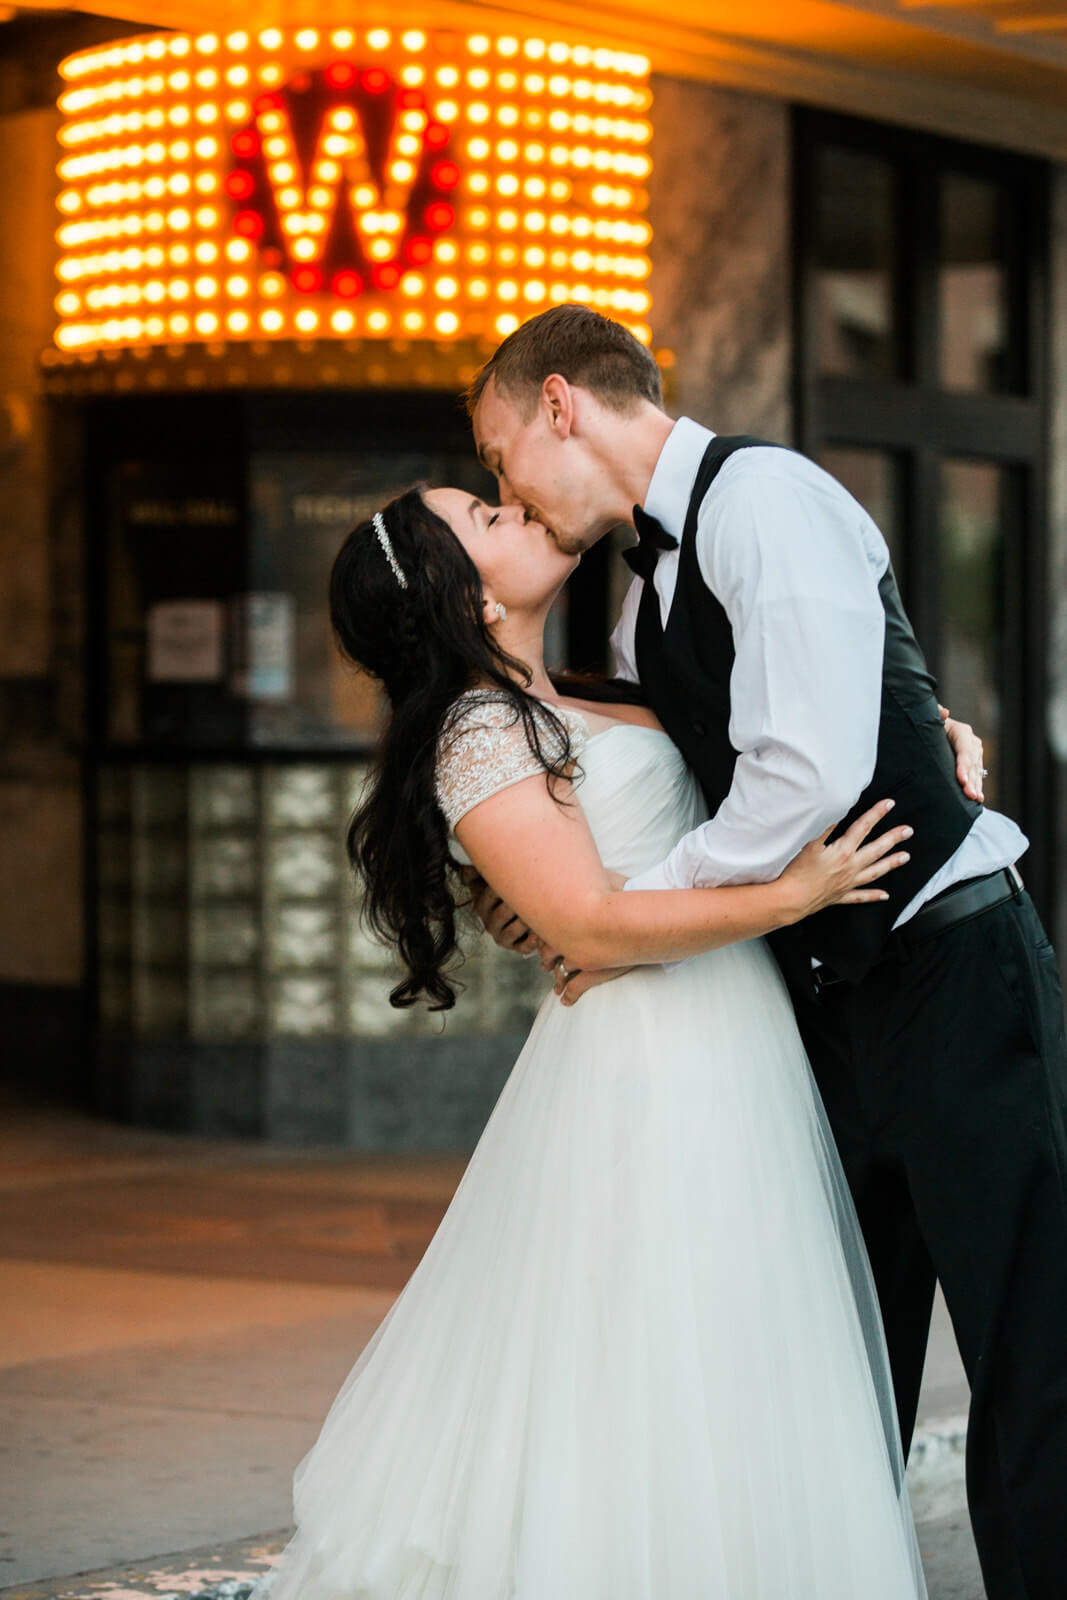 A bride and groom kiss in front of the Wilma Theatre sign in Missoula Montana during their wedding day